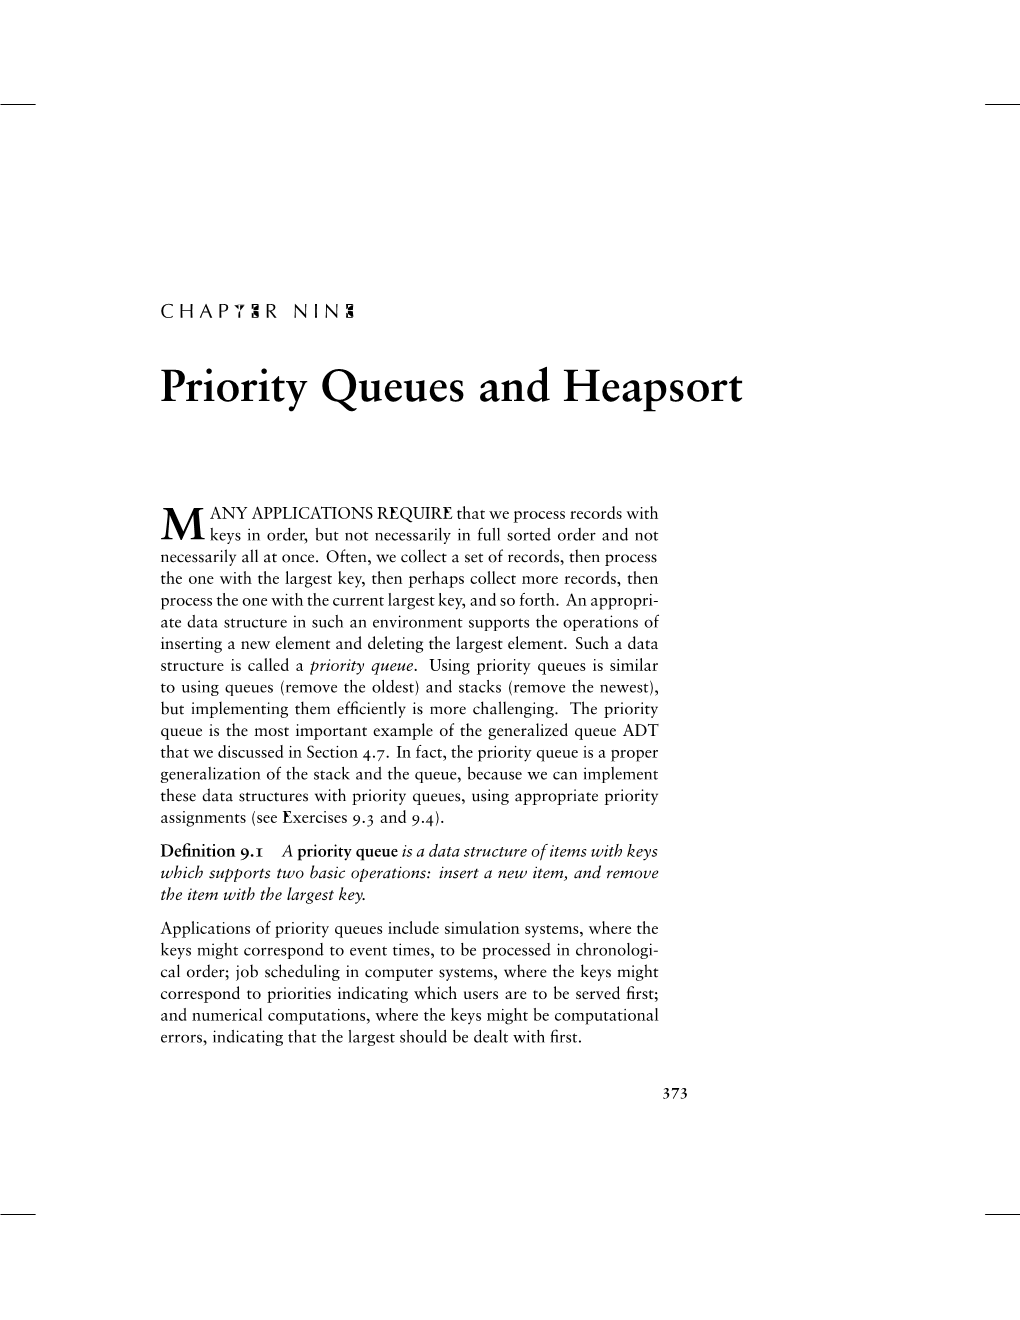 Priority Queues and Heapsort